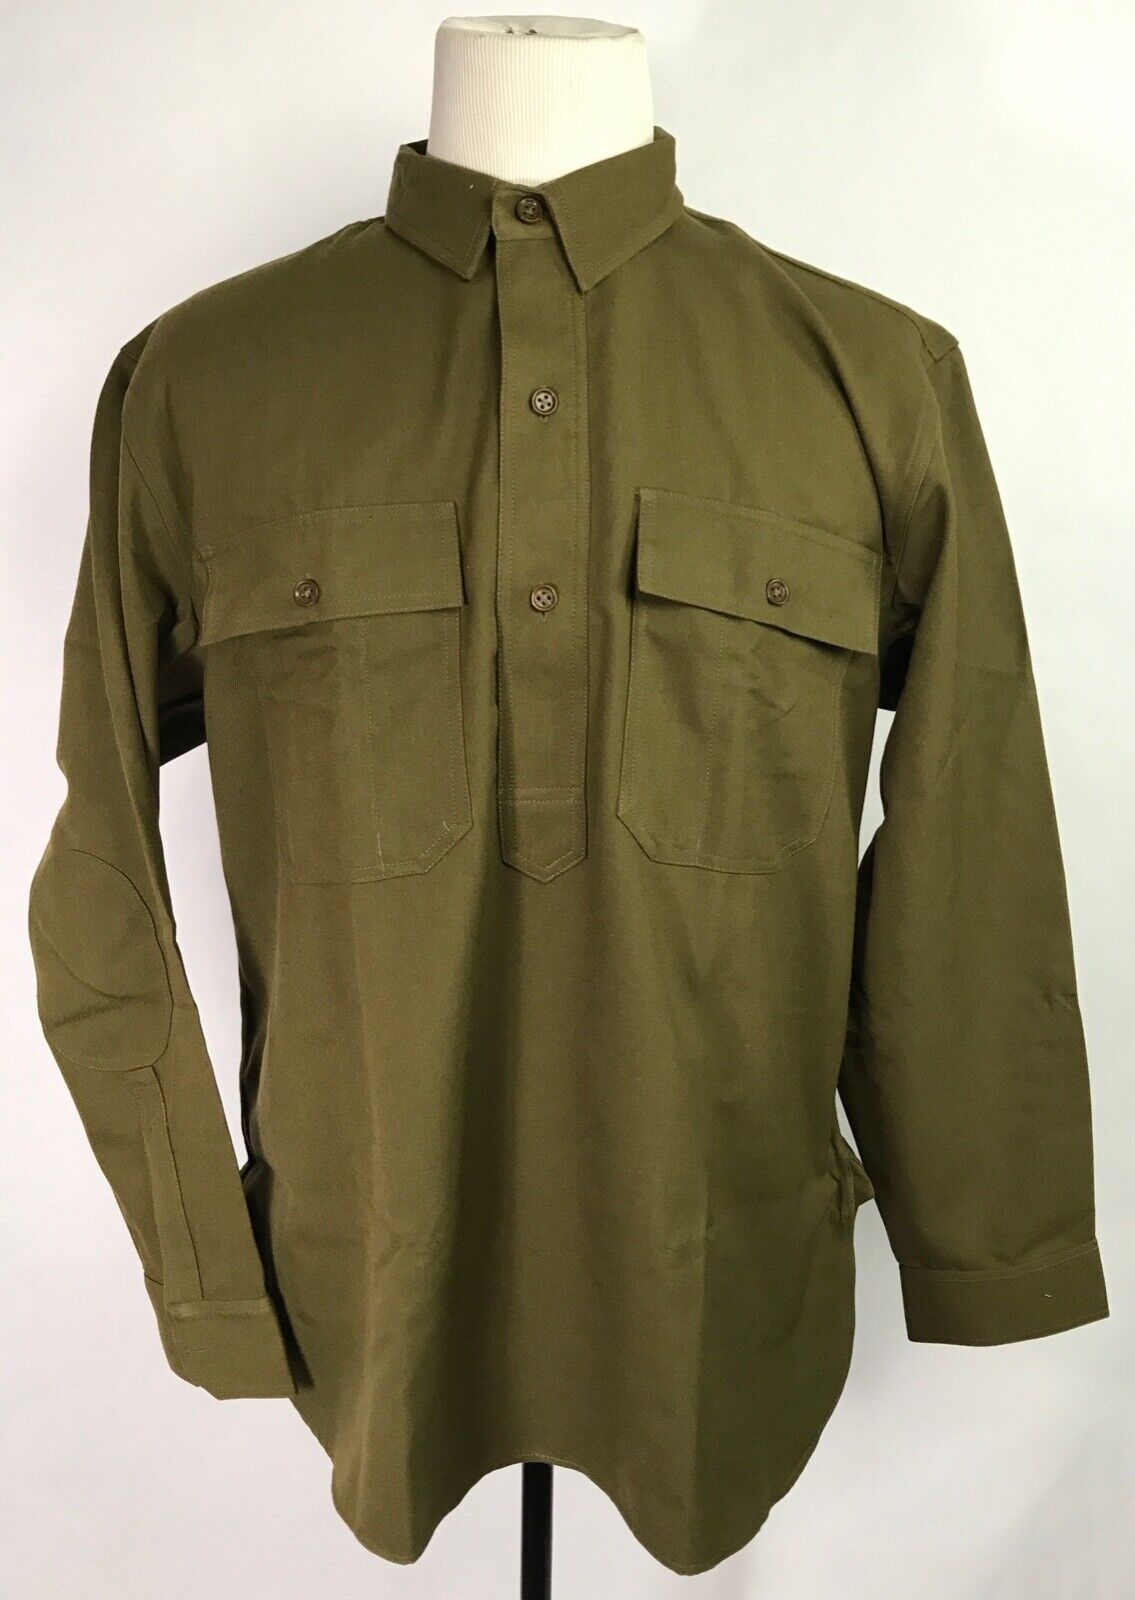 WWI US ARMY M1916 WOOL COMBAT FIELD SERVICE SHIRT-LARGE 44R